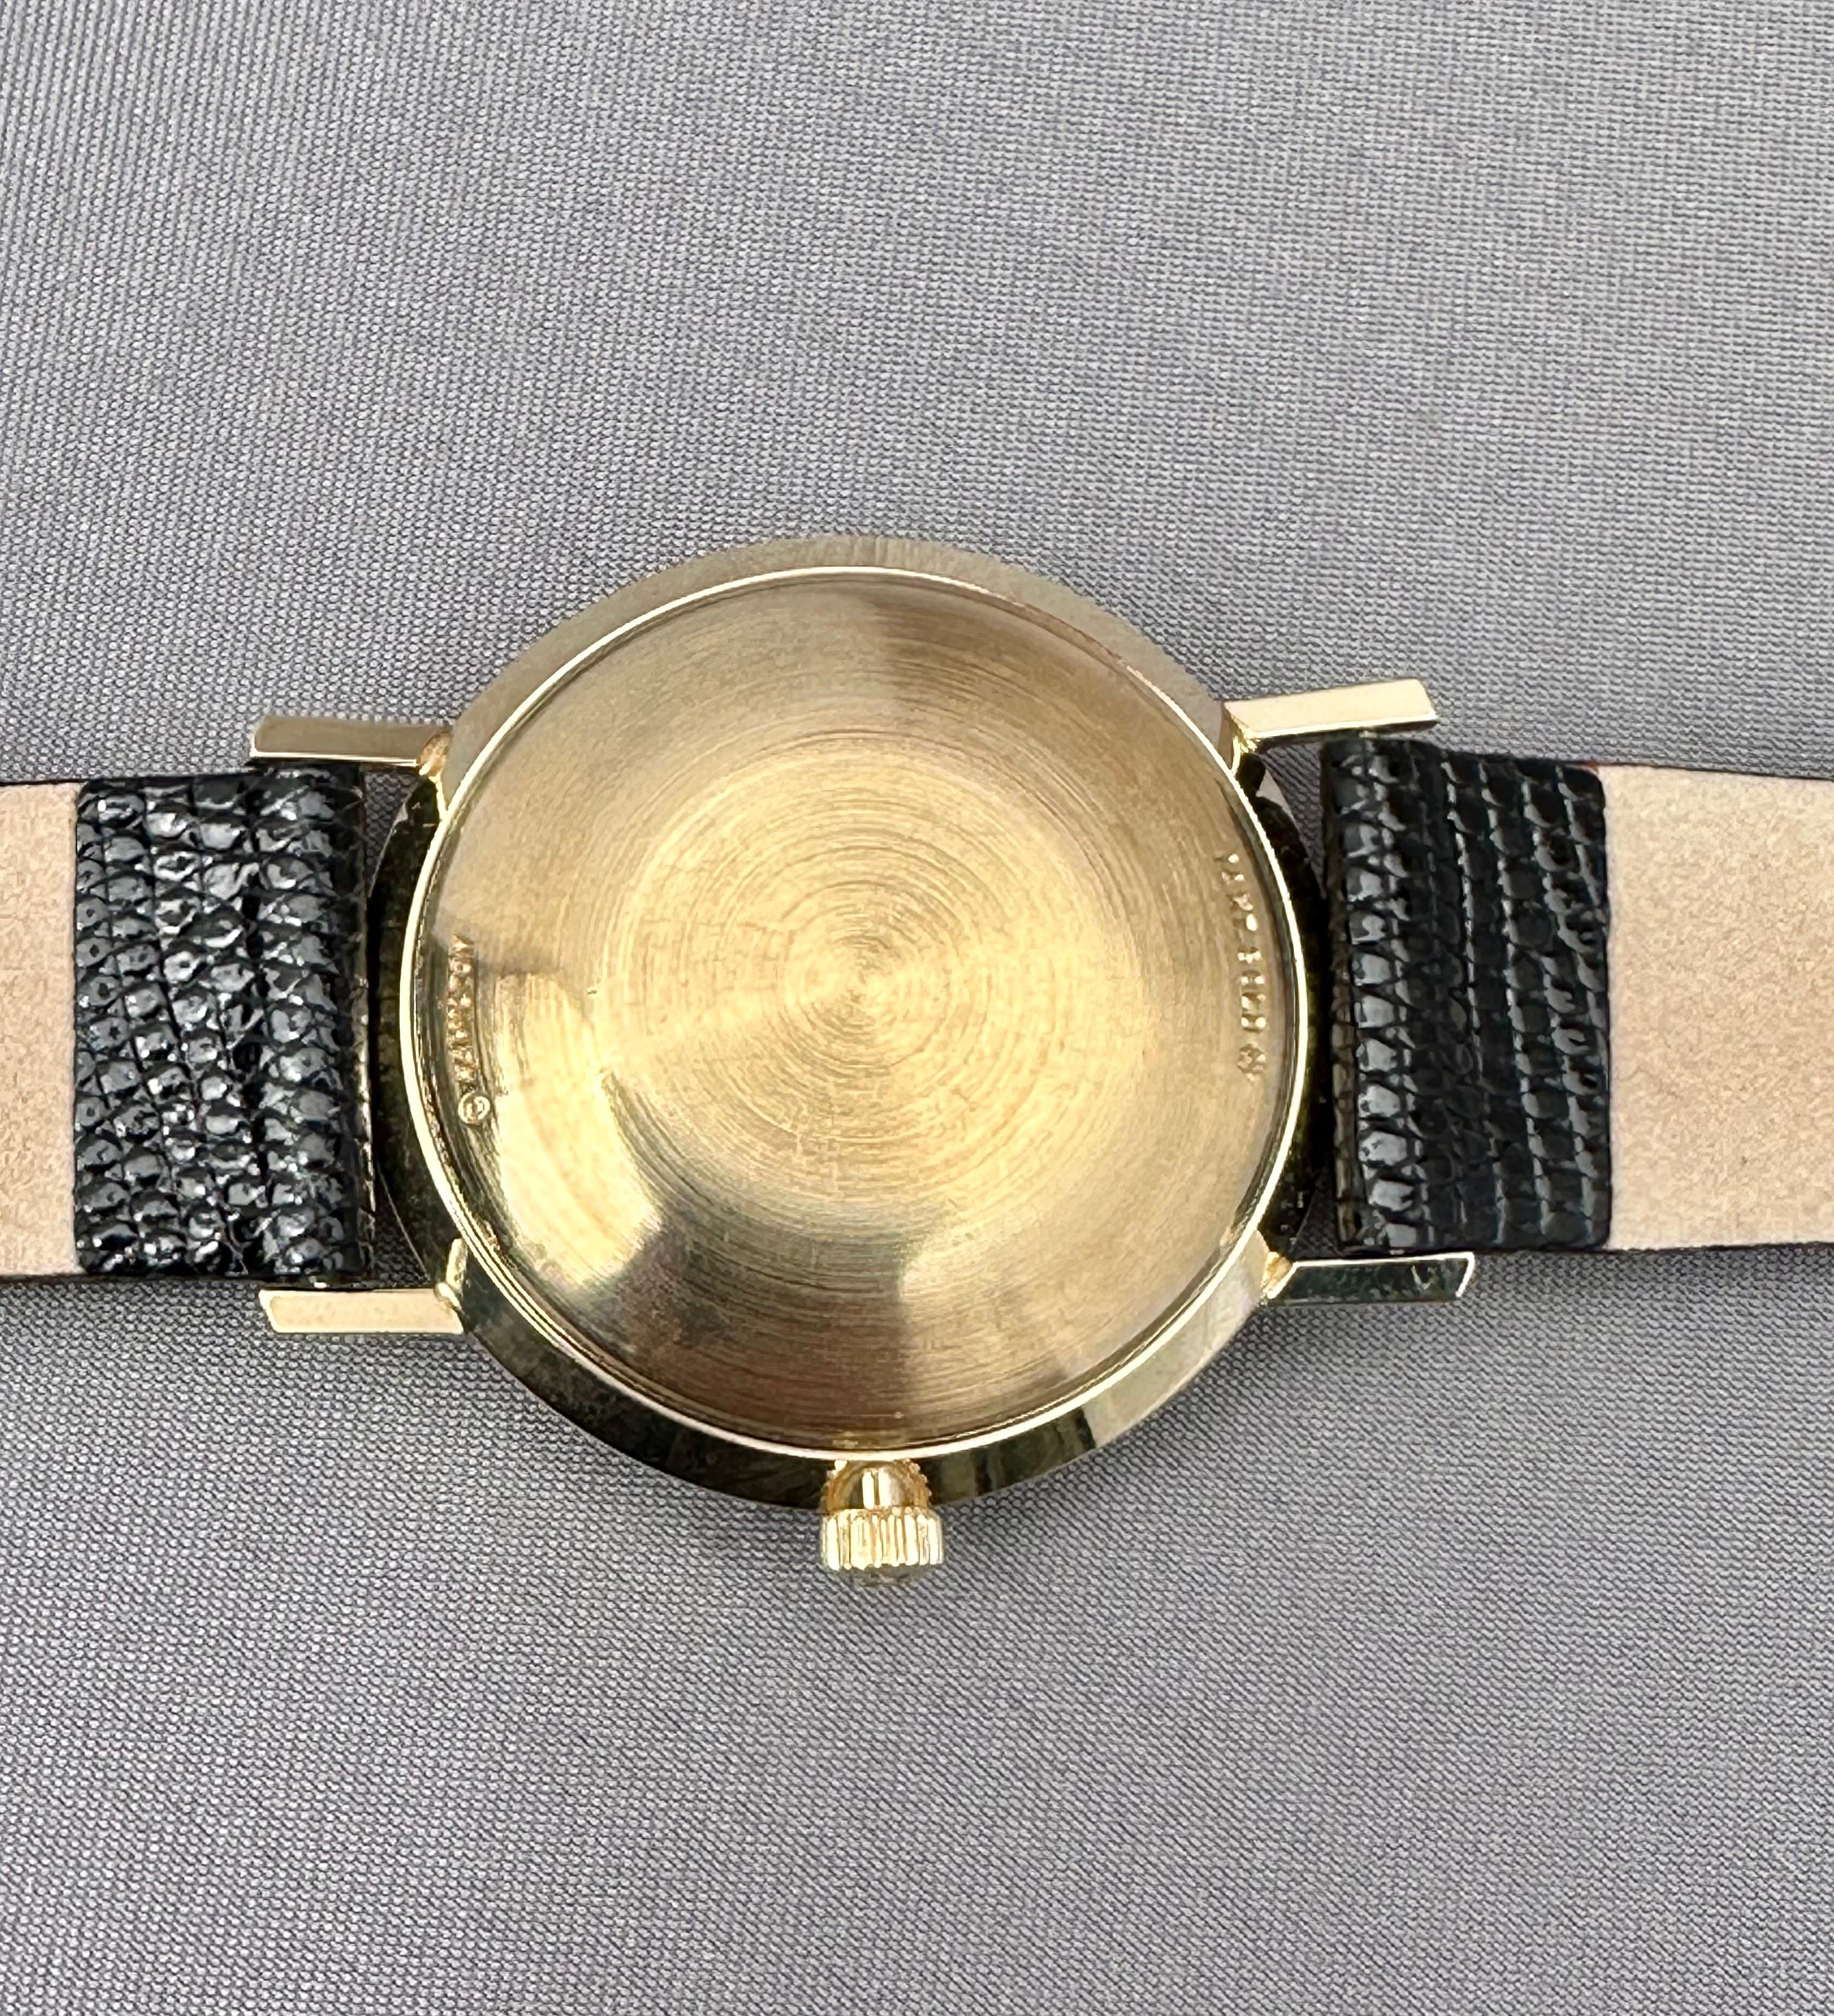 Vintage Hamilton Silver Dial 14k Solid Gold Automatic Watch - 1970's, 